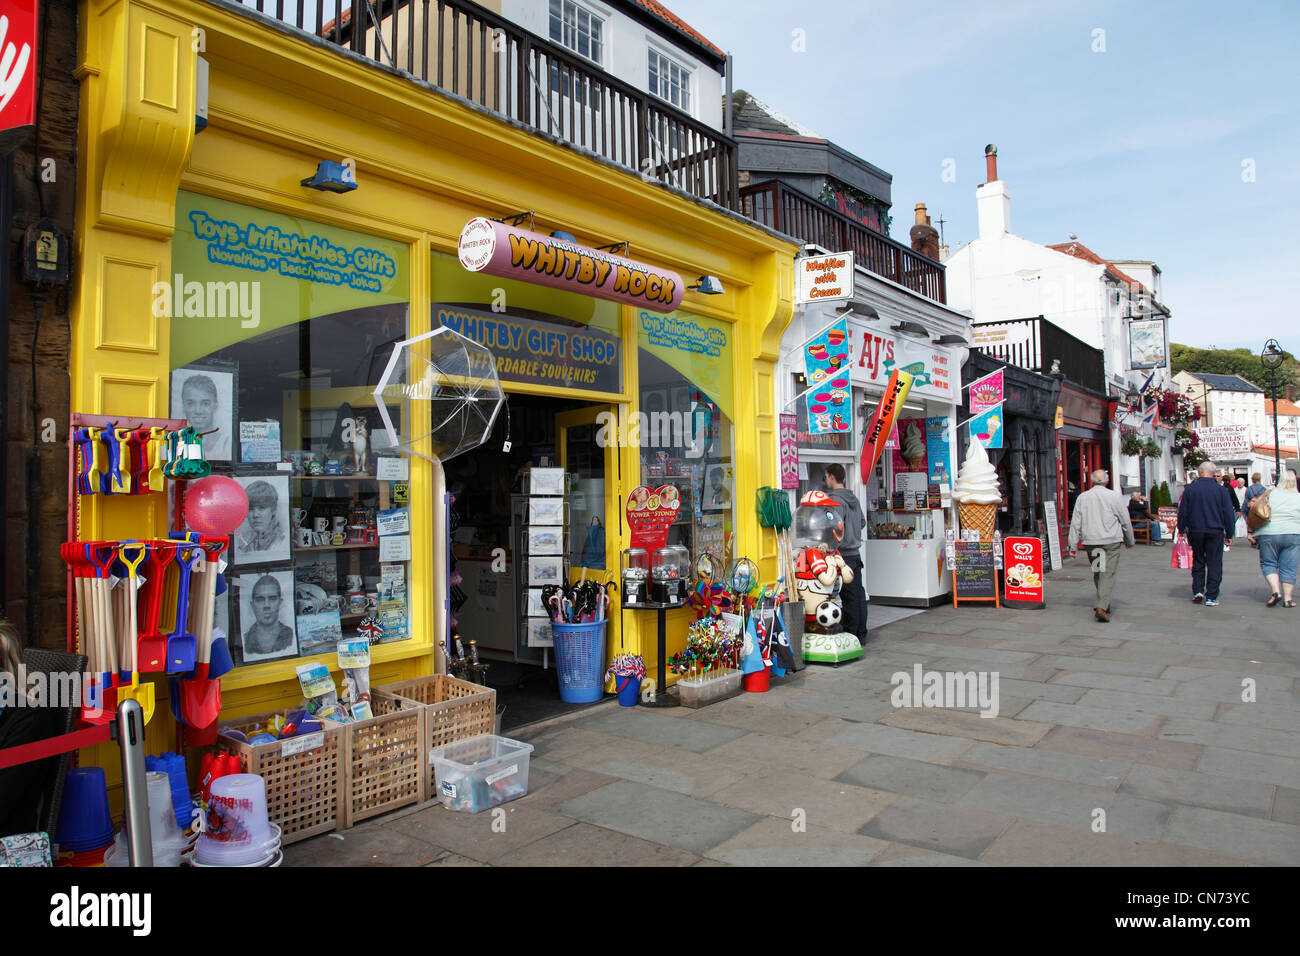 Shops in Whitby, North Yorkshire, England, U.K. Stock Photo